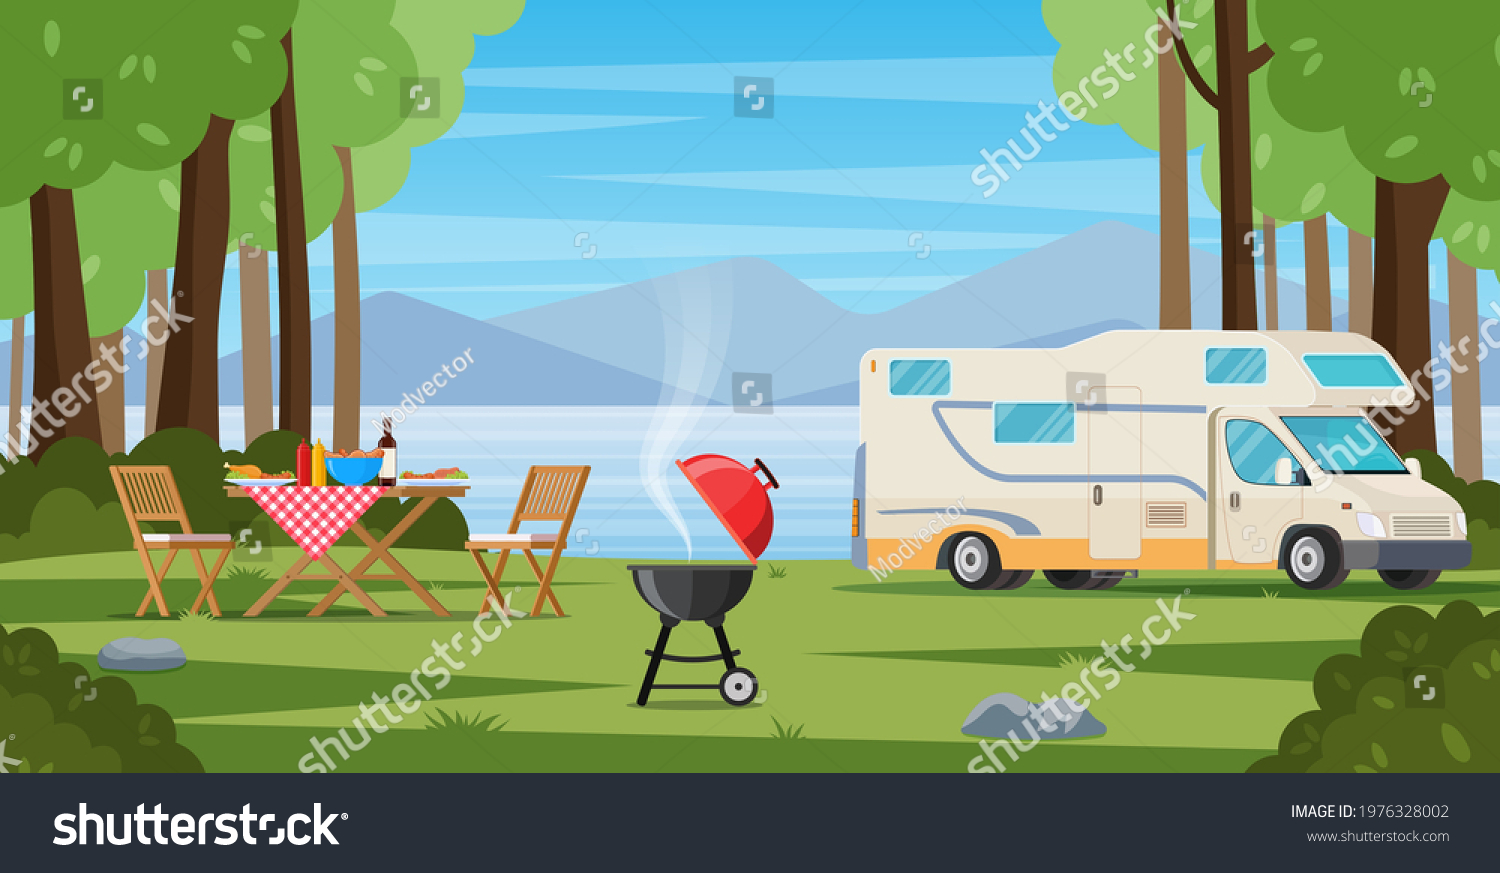 Stock Vector Camper With Barbecue Folding Table Deckchair Summer Camping Outdoor Nature Adventure Active 1976328002 